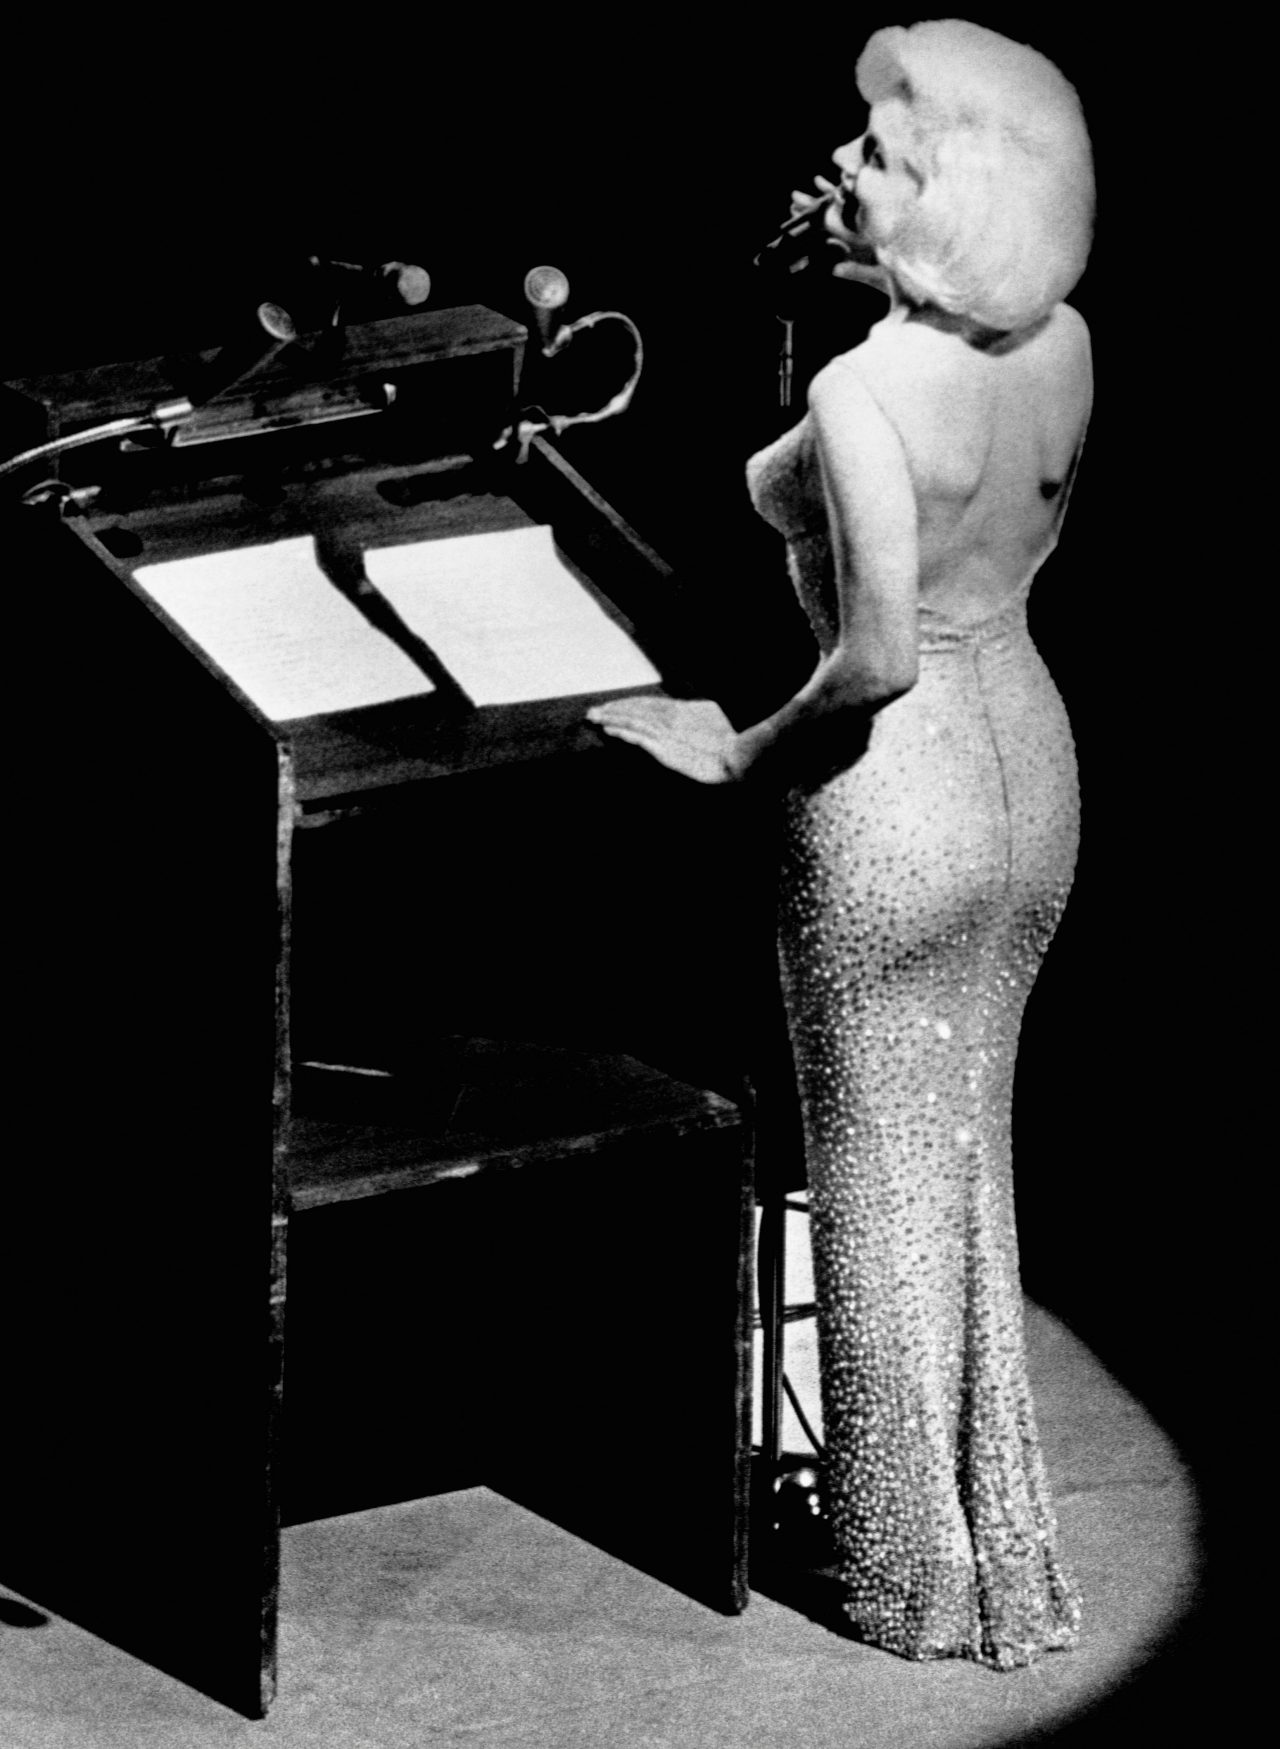 Actress Marilyn Monroe sings "Happy Birthday" to President John F. Kennedy at Madison Square Garden, for his upcoming 45th birthday.